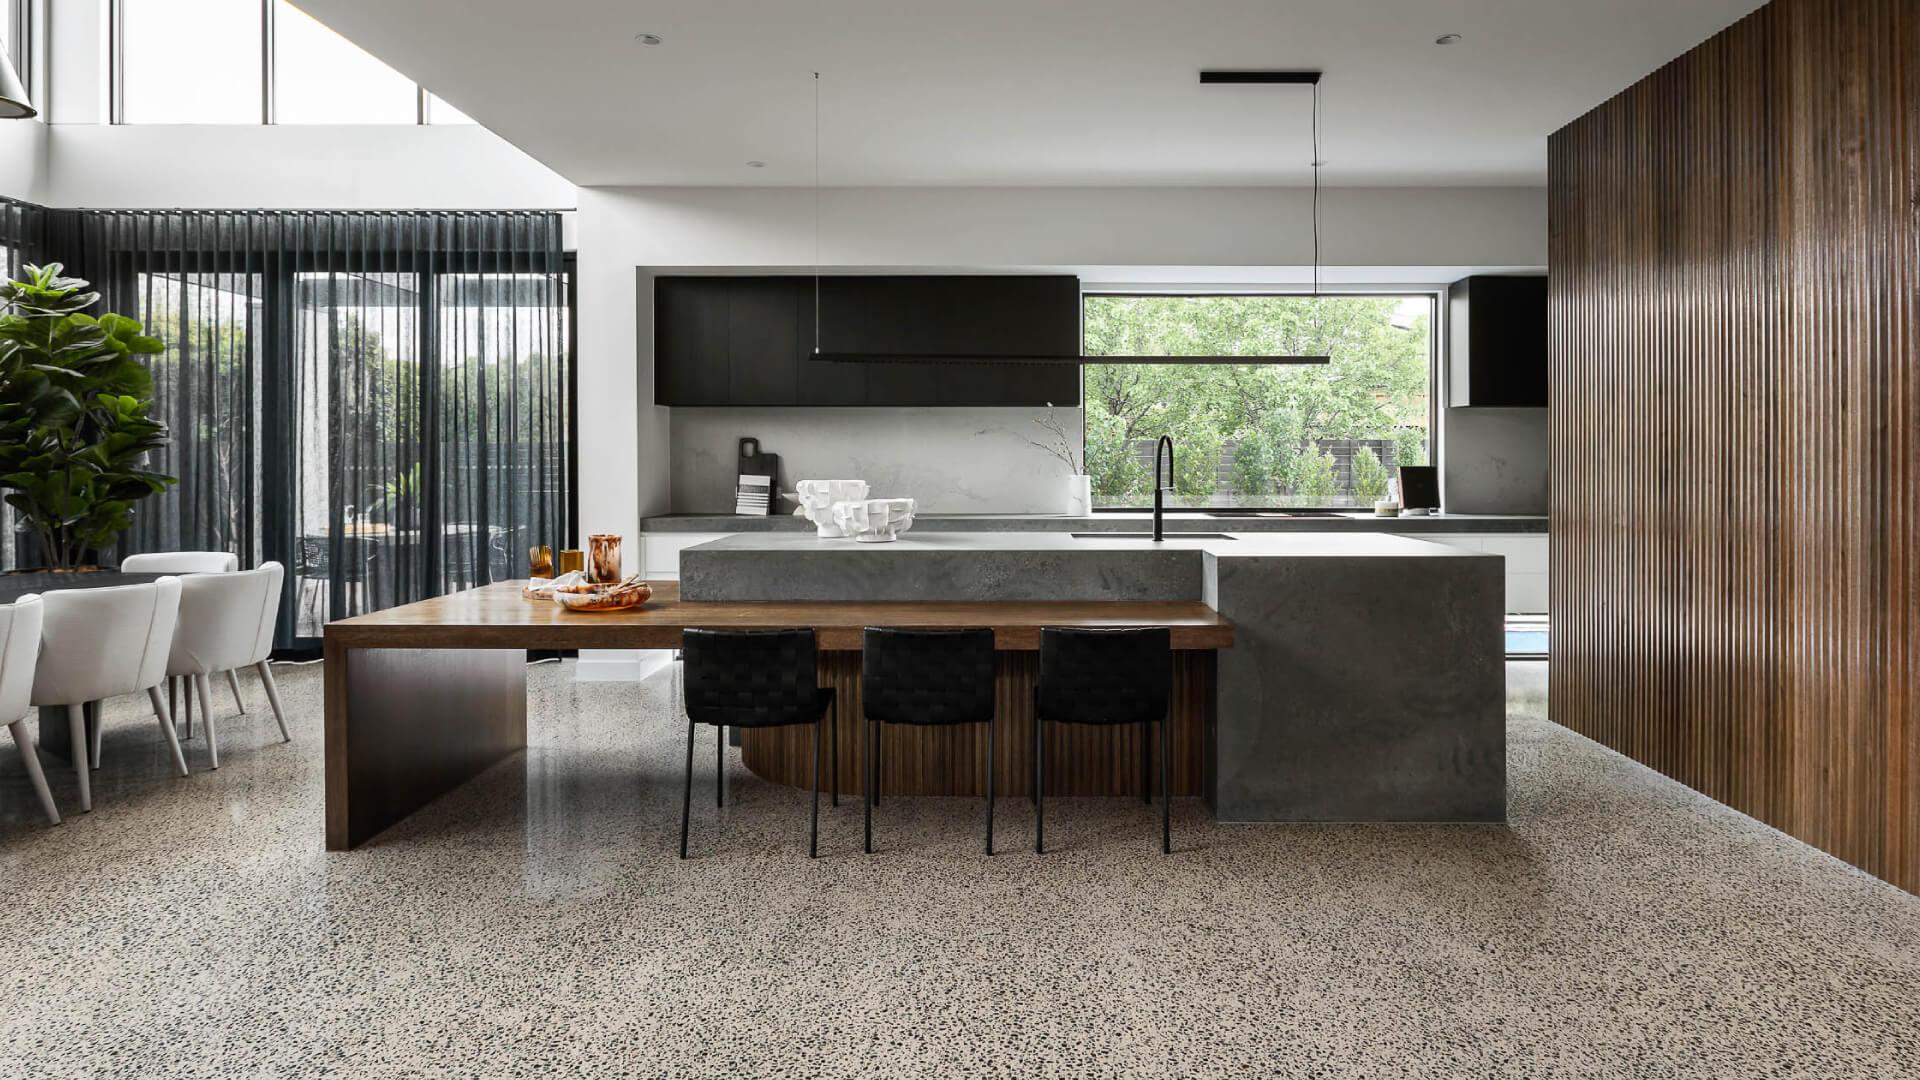 Kitchen at Patterson on Display at Bentleigh